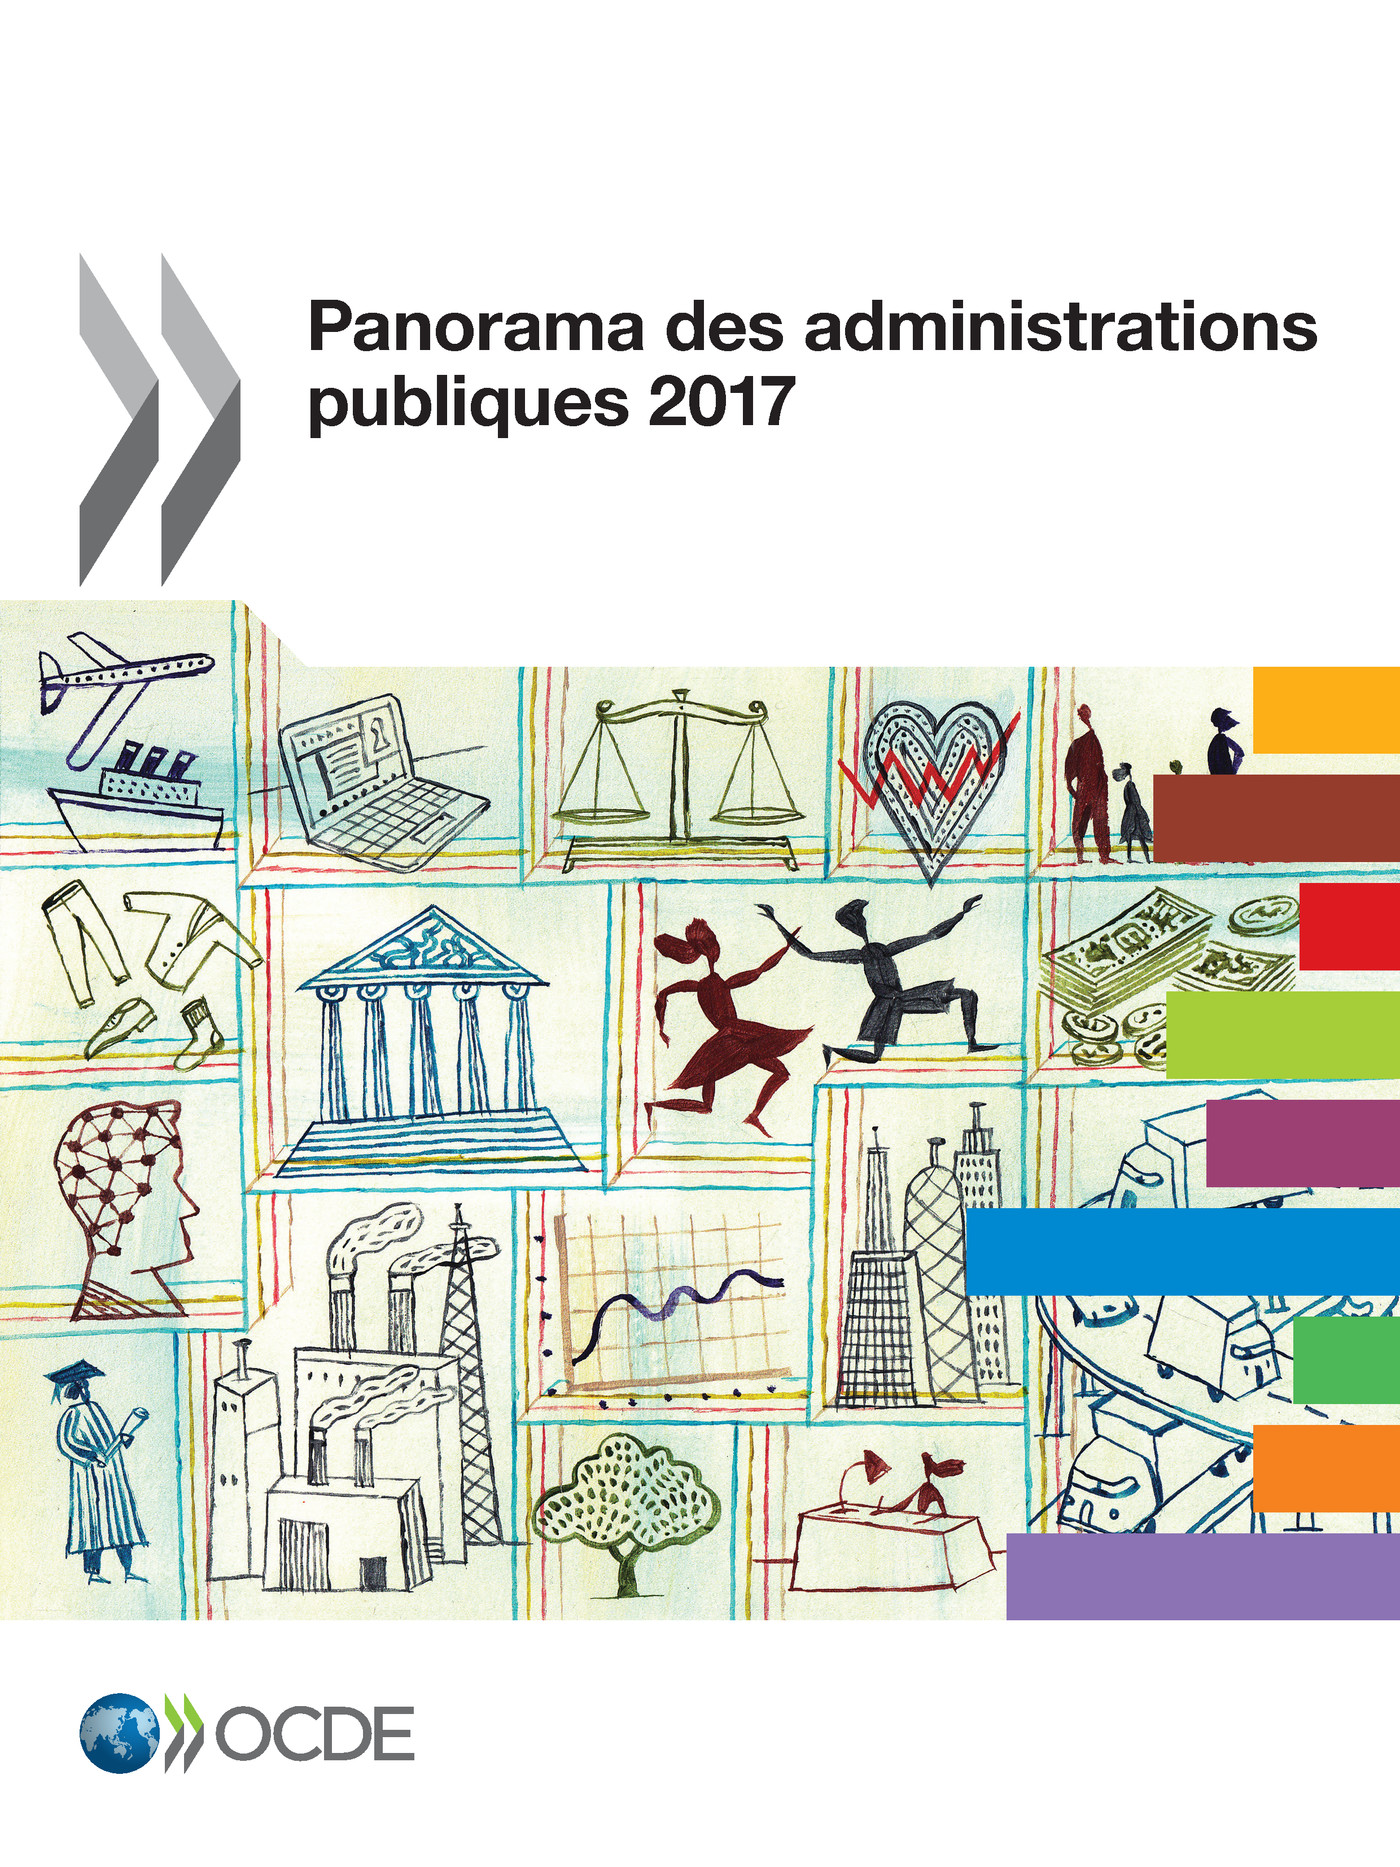 Panorama des administrations publiques 2017 -  Collectif - OCDE / OECD